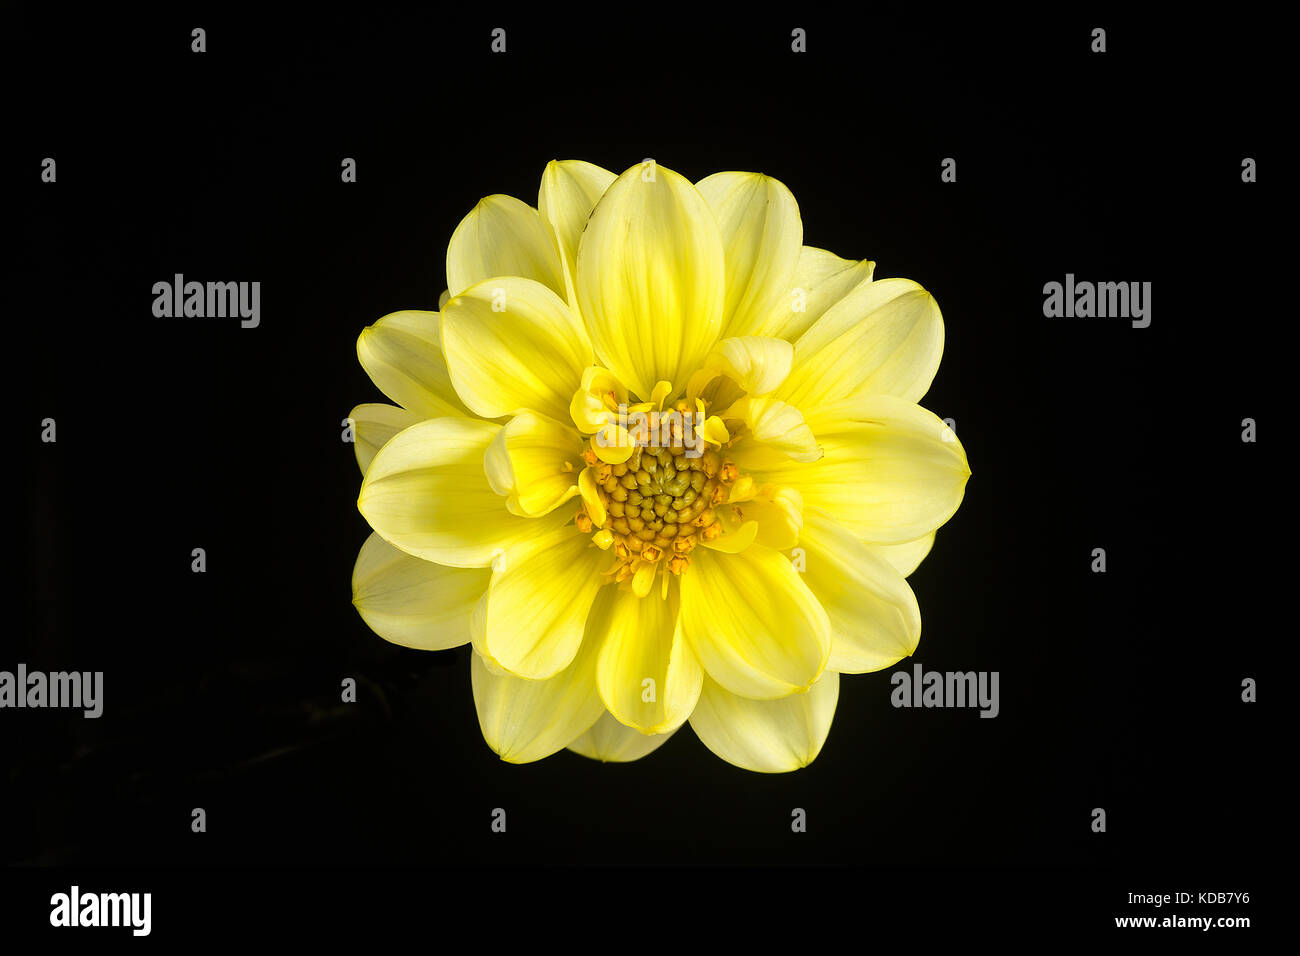 A single flower of a beautiful yellow dahlia isolated against a black background. Stock Photo